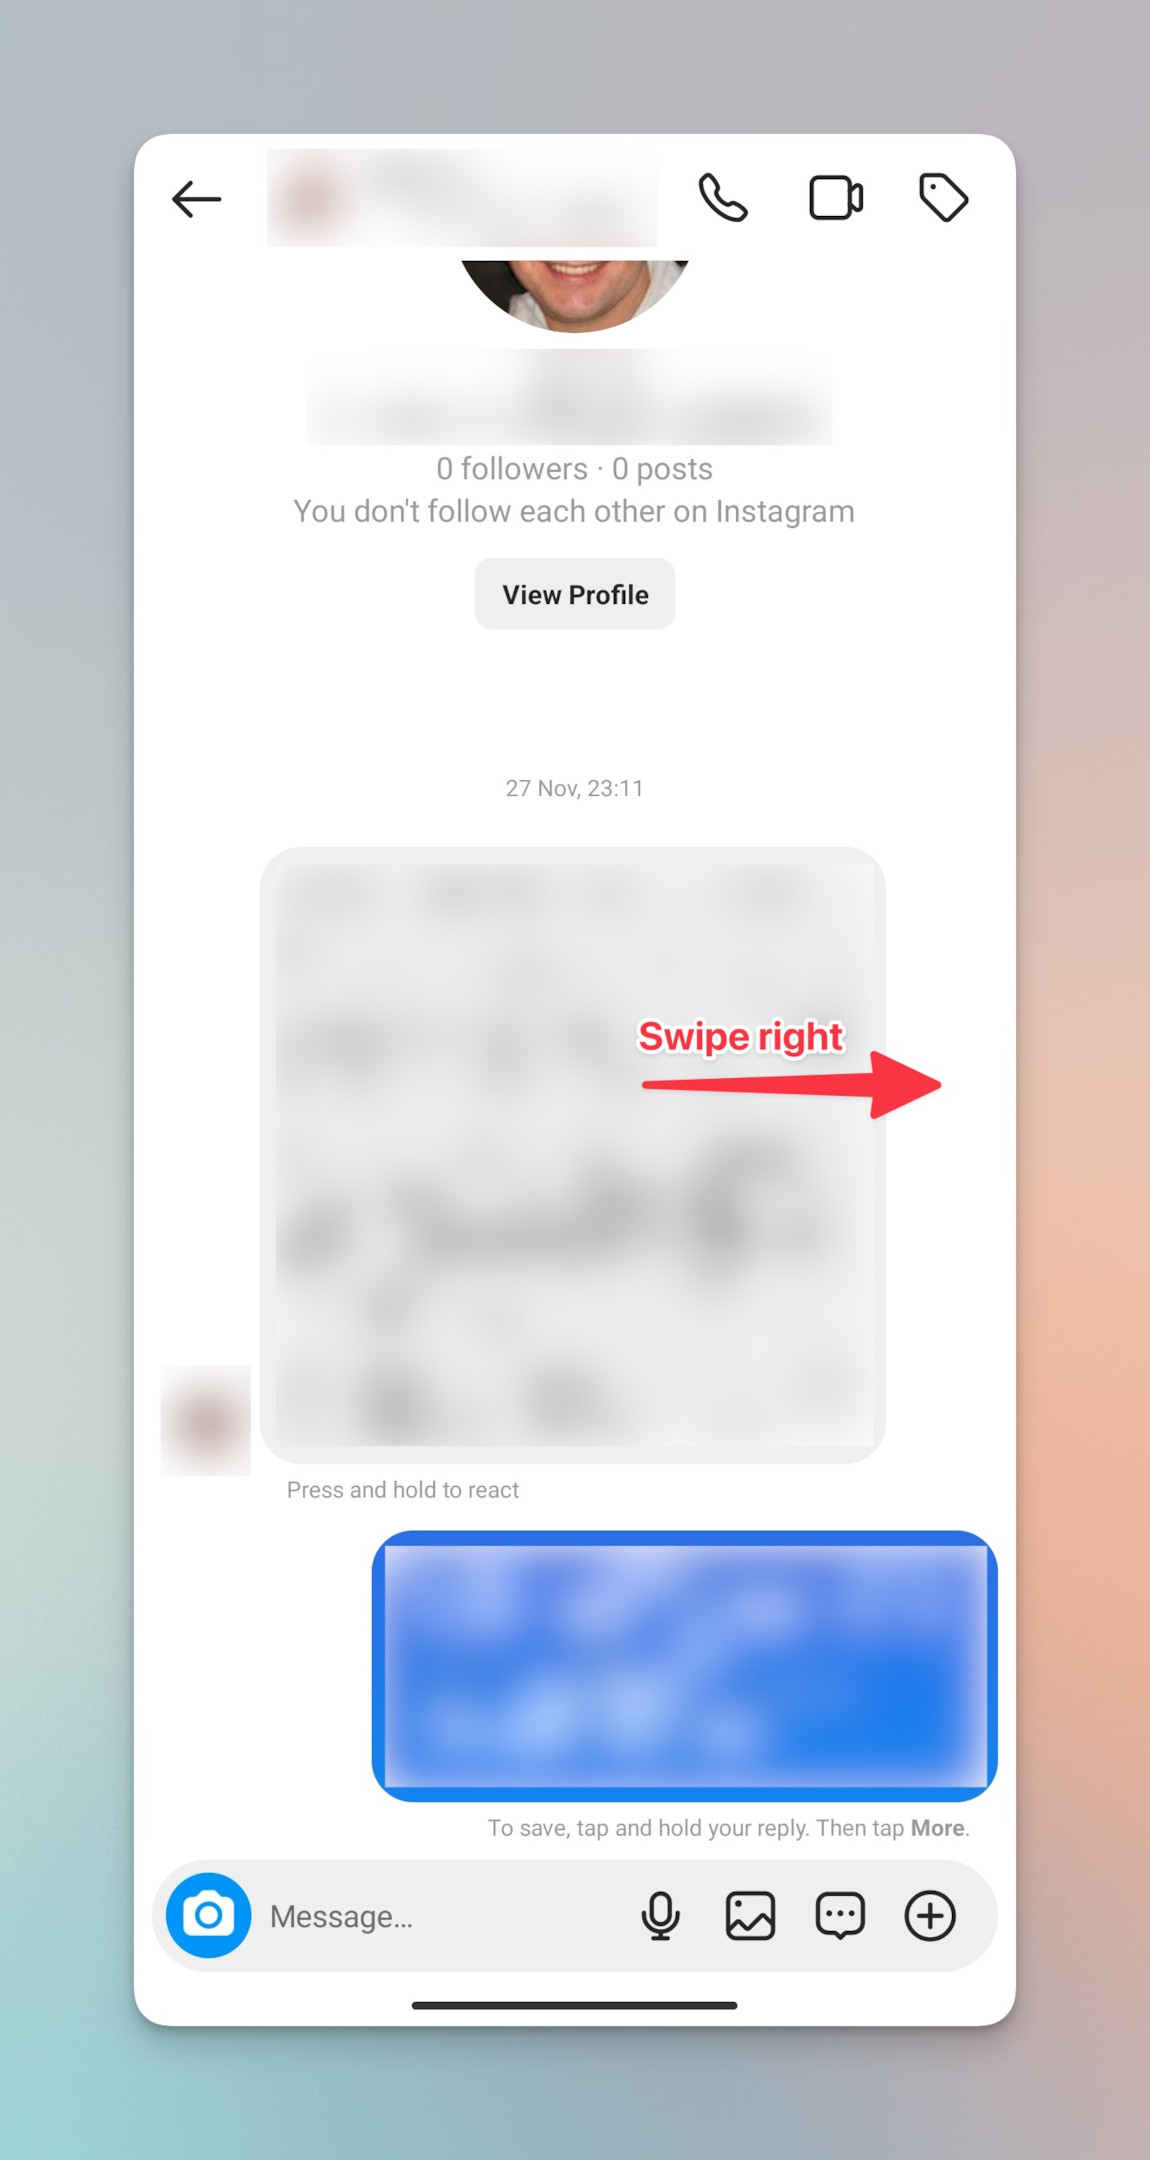 Remote.tools is showing how to reply to a message in Instagram chat on iOS device. Swipe right on a specific message to reply to that message only.